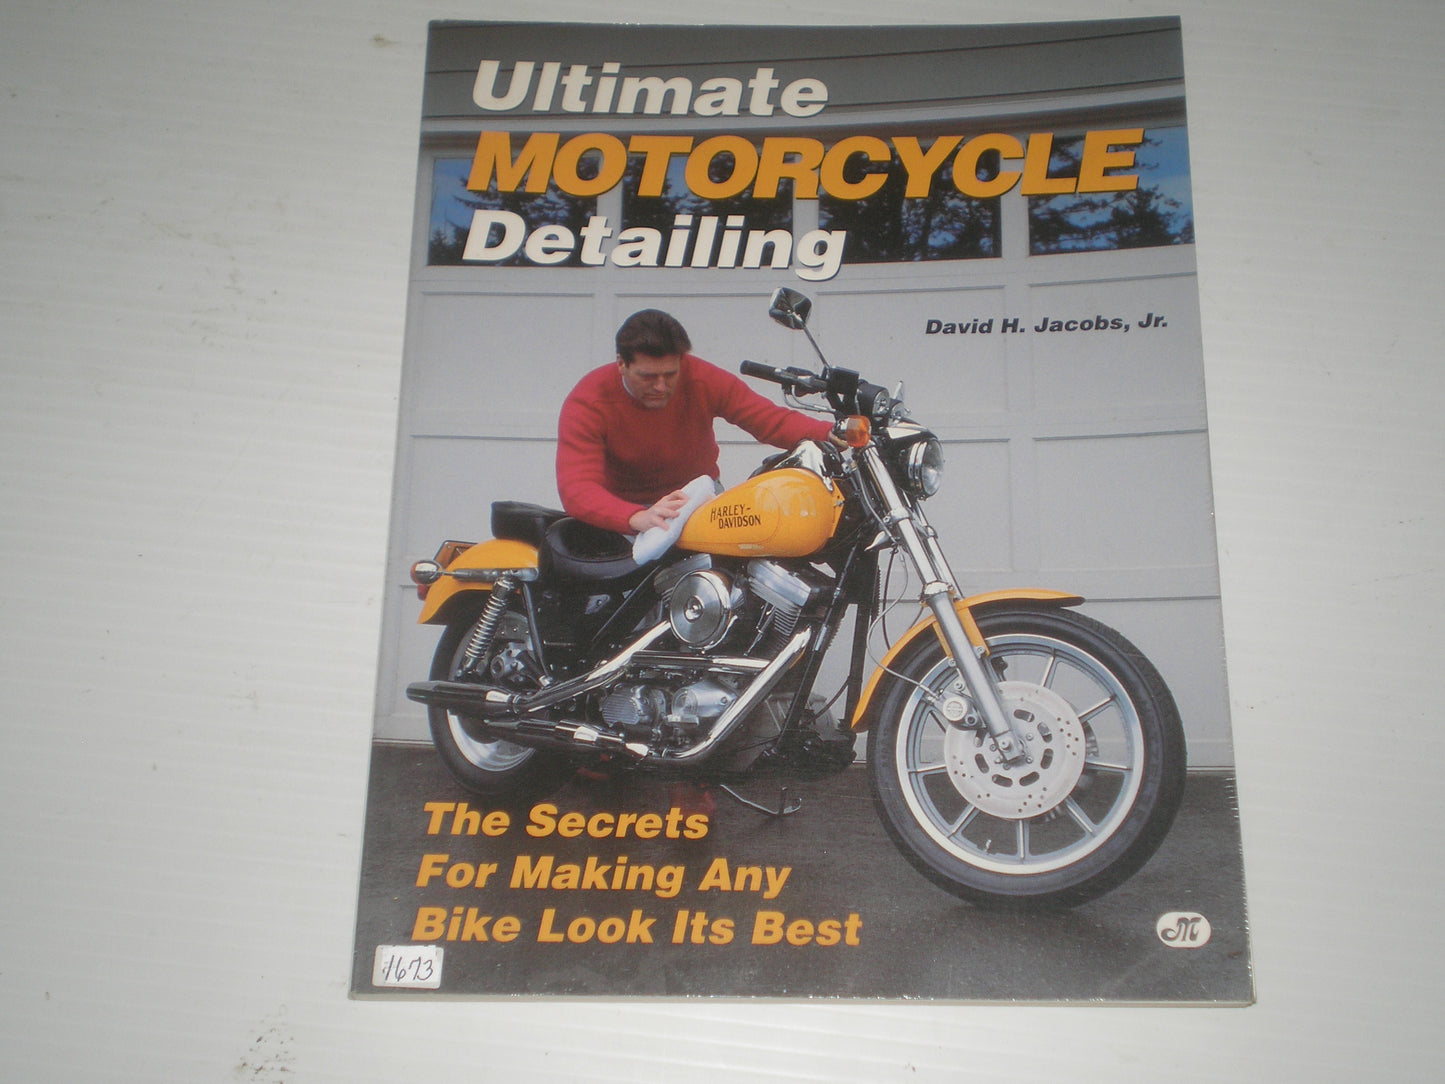 Ultimate Motorcycle Detailing by David H. Jacobs, Jr.  #1673